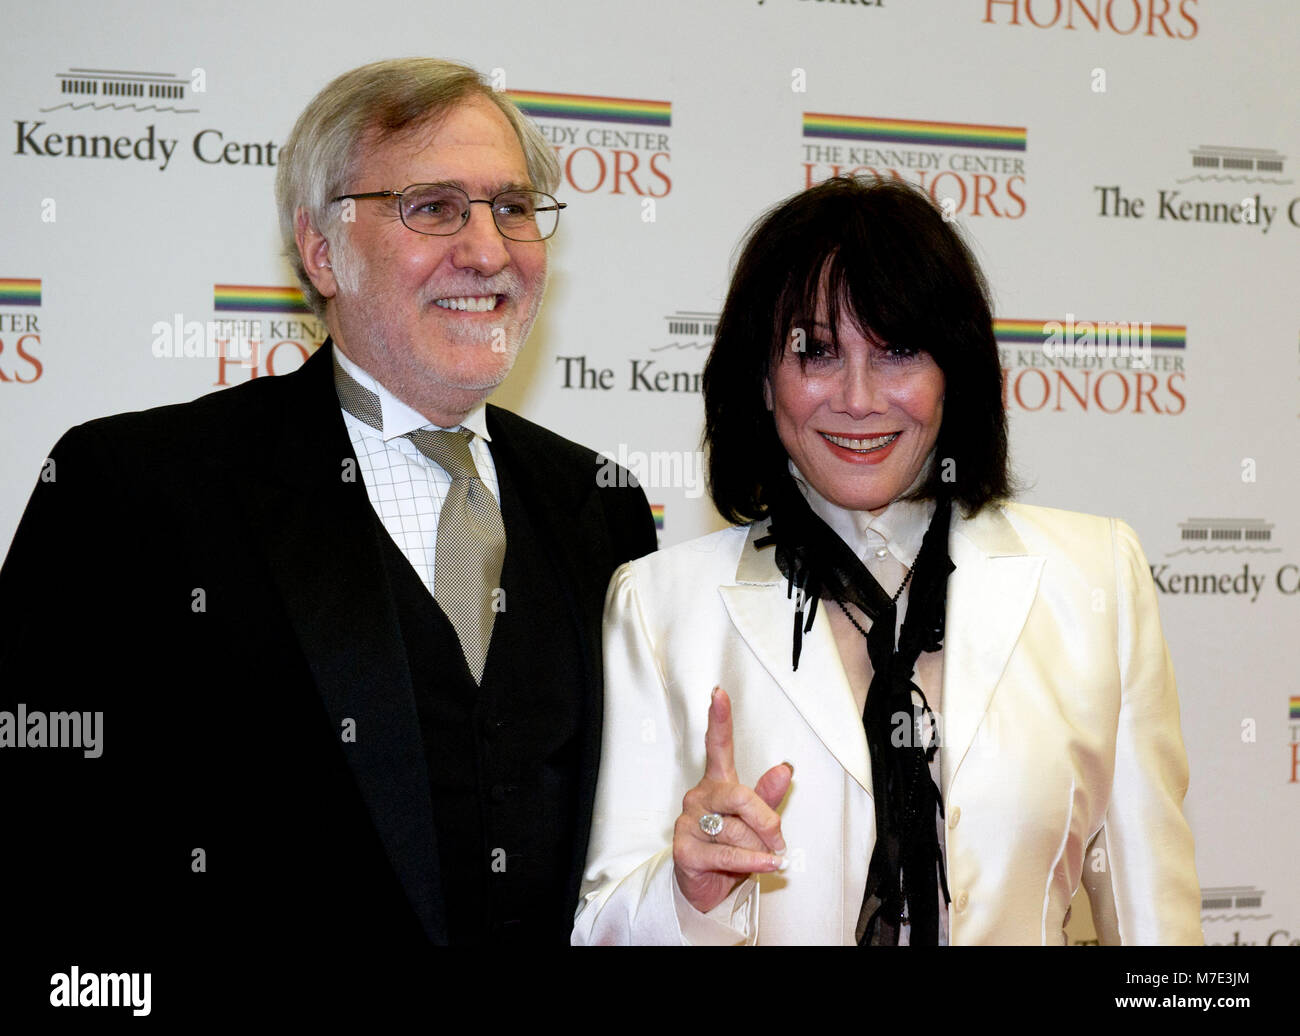 Michele Lee and Fred Rappoport arrive for the formal Artist's Dinner honoring the recipients of the 2012 Kennedy Center Honors hosted by United States Secretary of State Hillary Rodham Clinton at the U.S. Department of State in Washington, D.C. on Saturday, December 1, 2012. The 2012 honorees are Buddy Guy, actor Dustin Hoffman, late-night host David Letterman, dancer Natalia Makarova, and the British rock band Led Zeppelin (Robert Plant, Jimmy Page, and John Paul Jones). Credit: Ron Sachs / CNP /MediaPunch Stock Photo